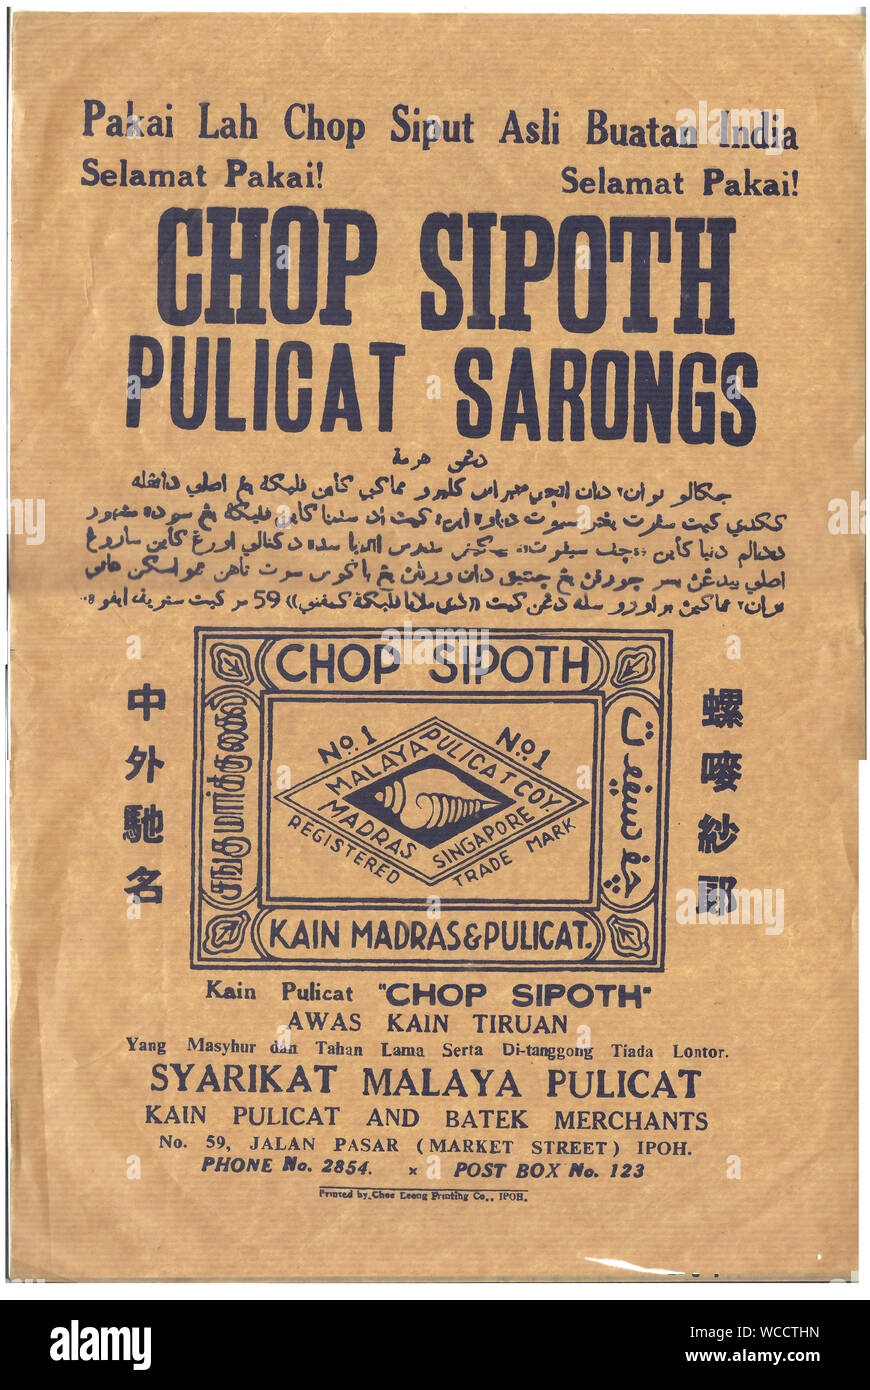 Old Poster - Malaysia. Real Vintage Art by Scan Contains several languages/, such as Chinese, Malay, Tamil, Jawi etc Stock Photo